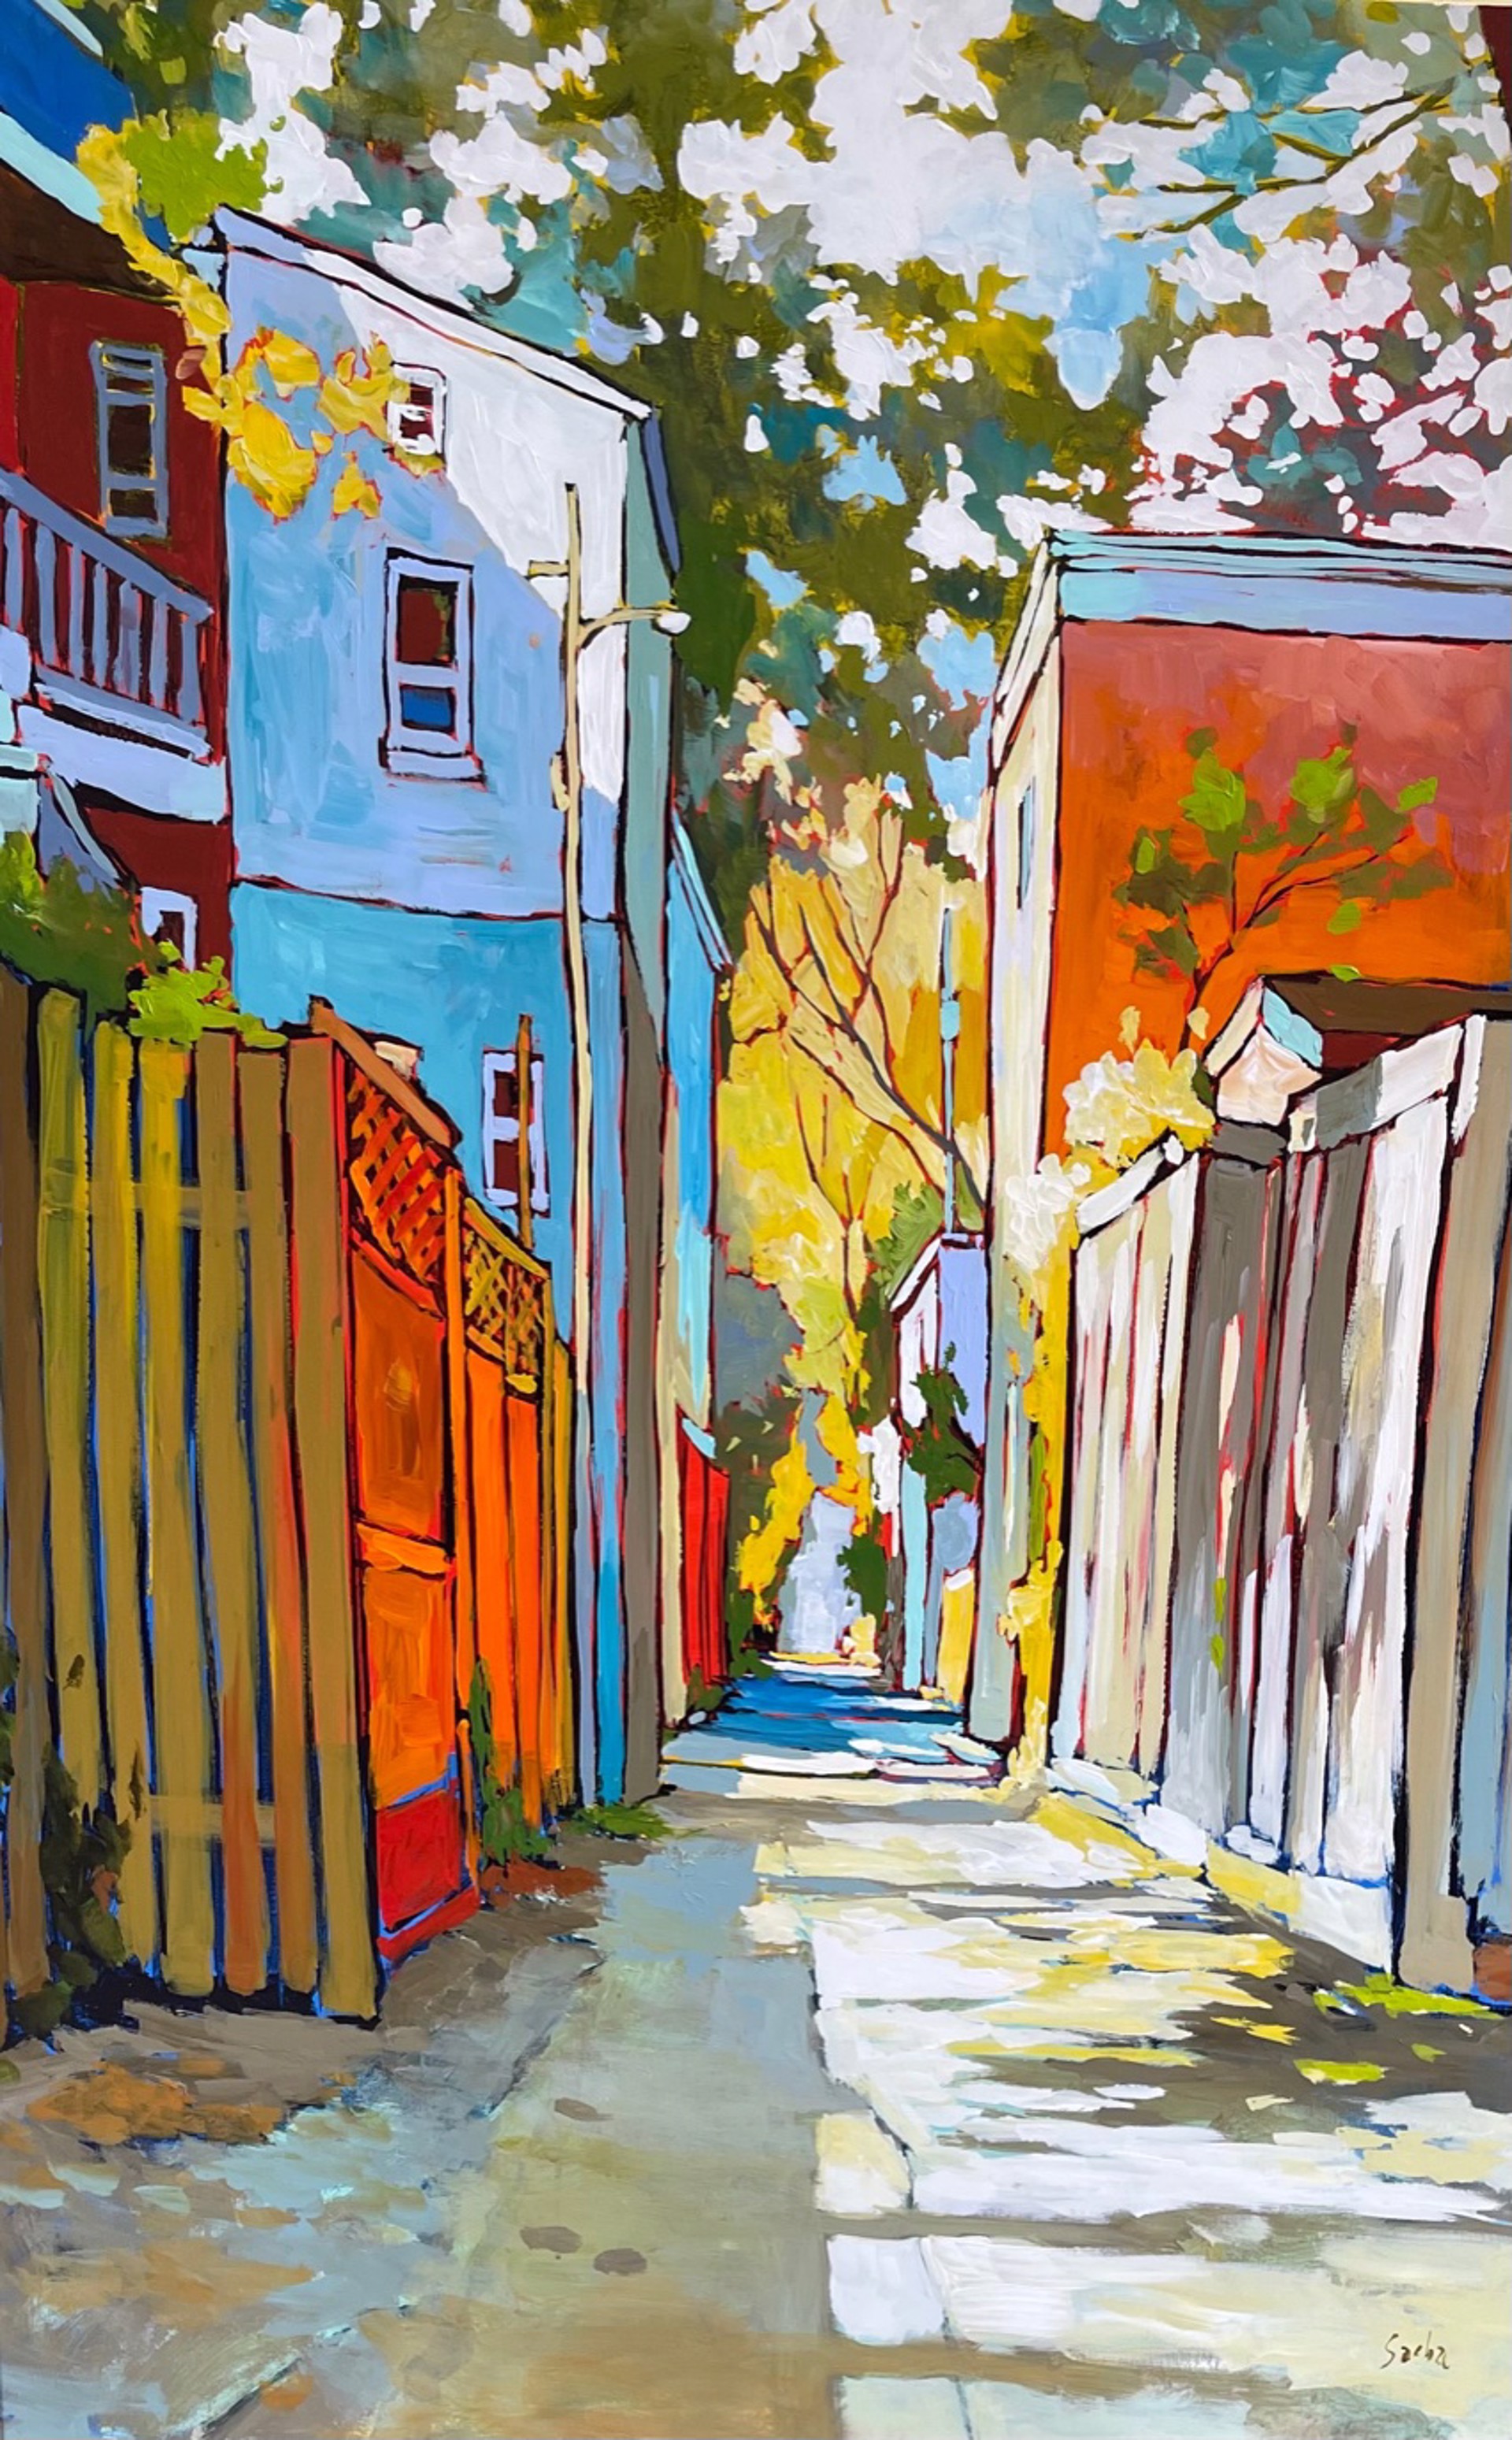 Morning Glory Alley 6124592 by Sacha Barrette